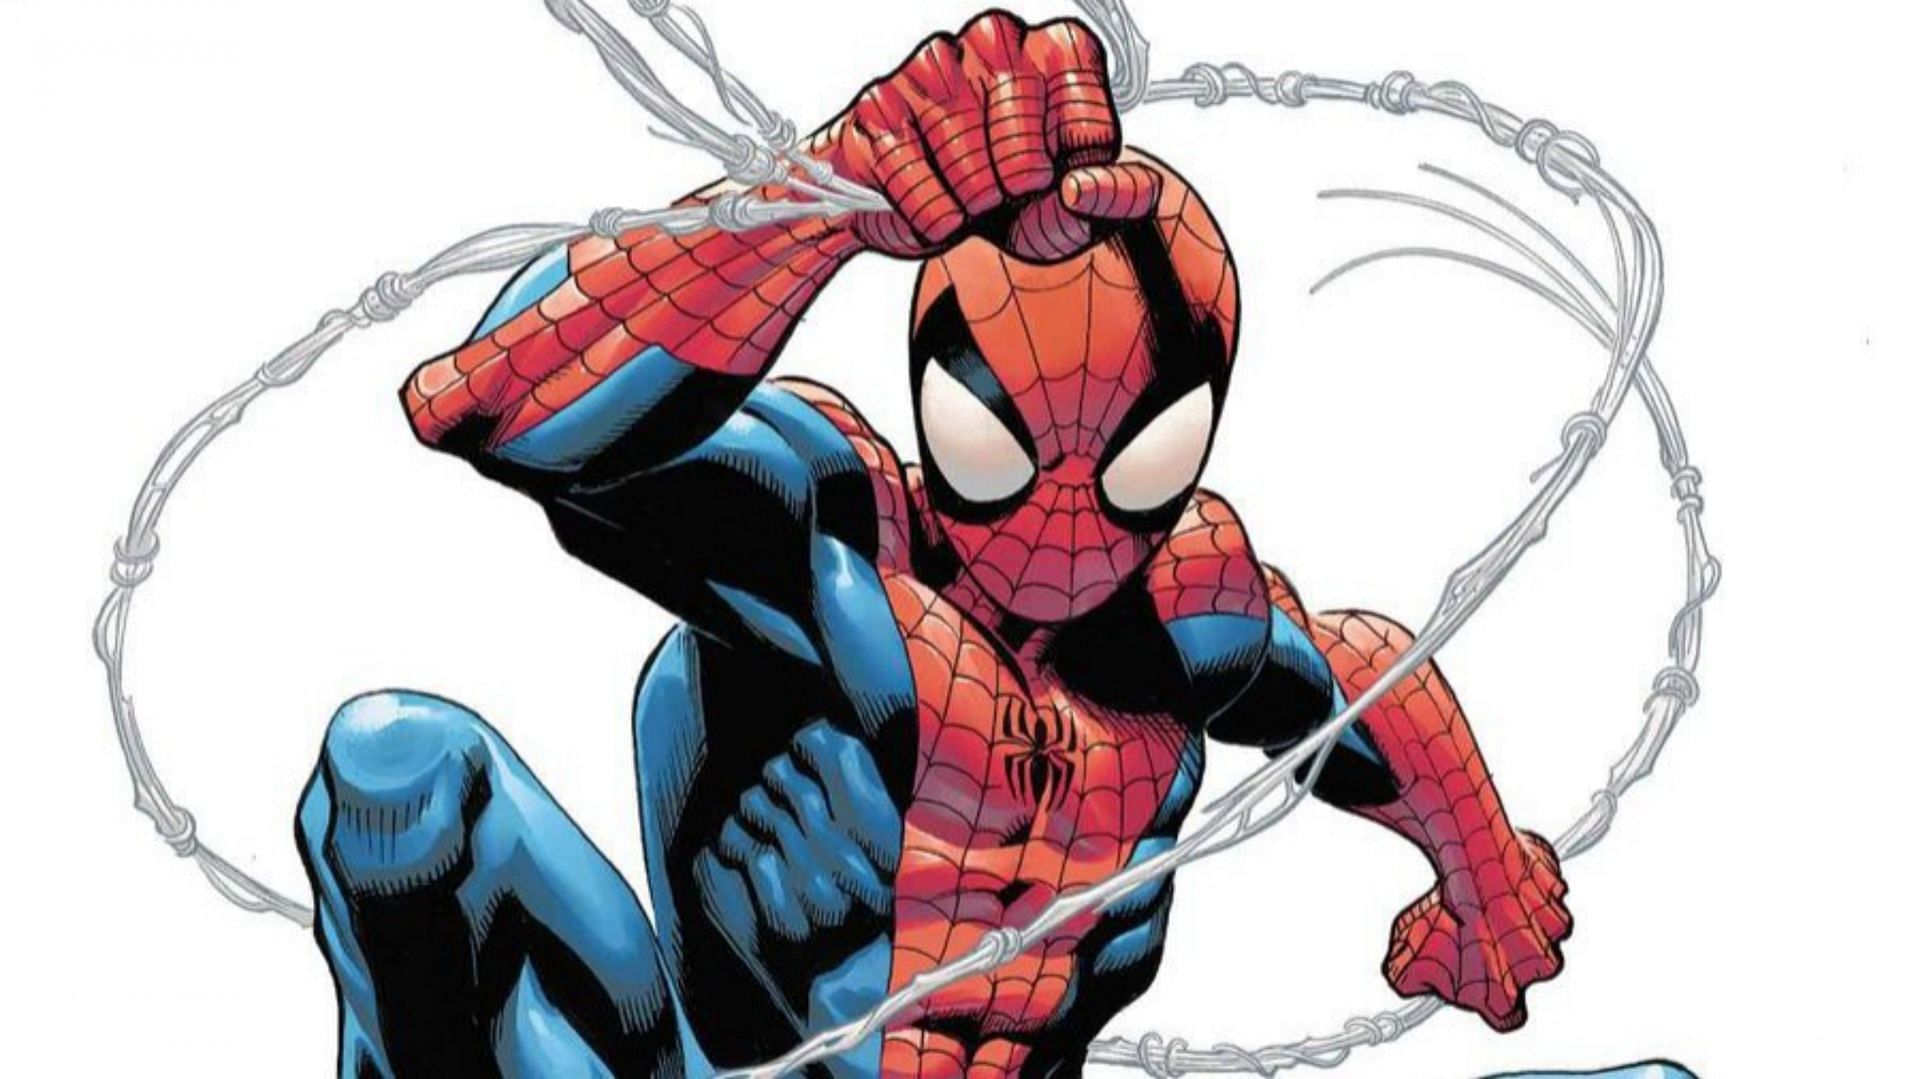 Spider-Man #1 will begin a new story for the web-head (Image via Marvel Comics)